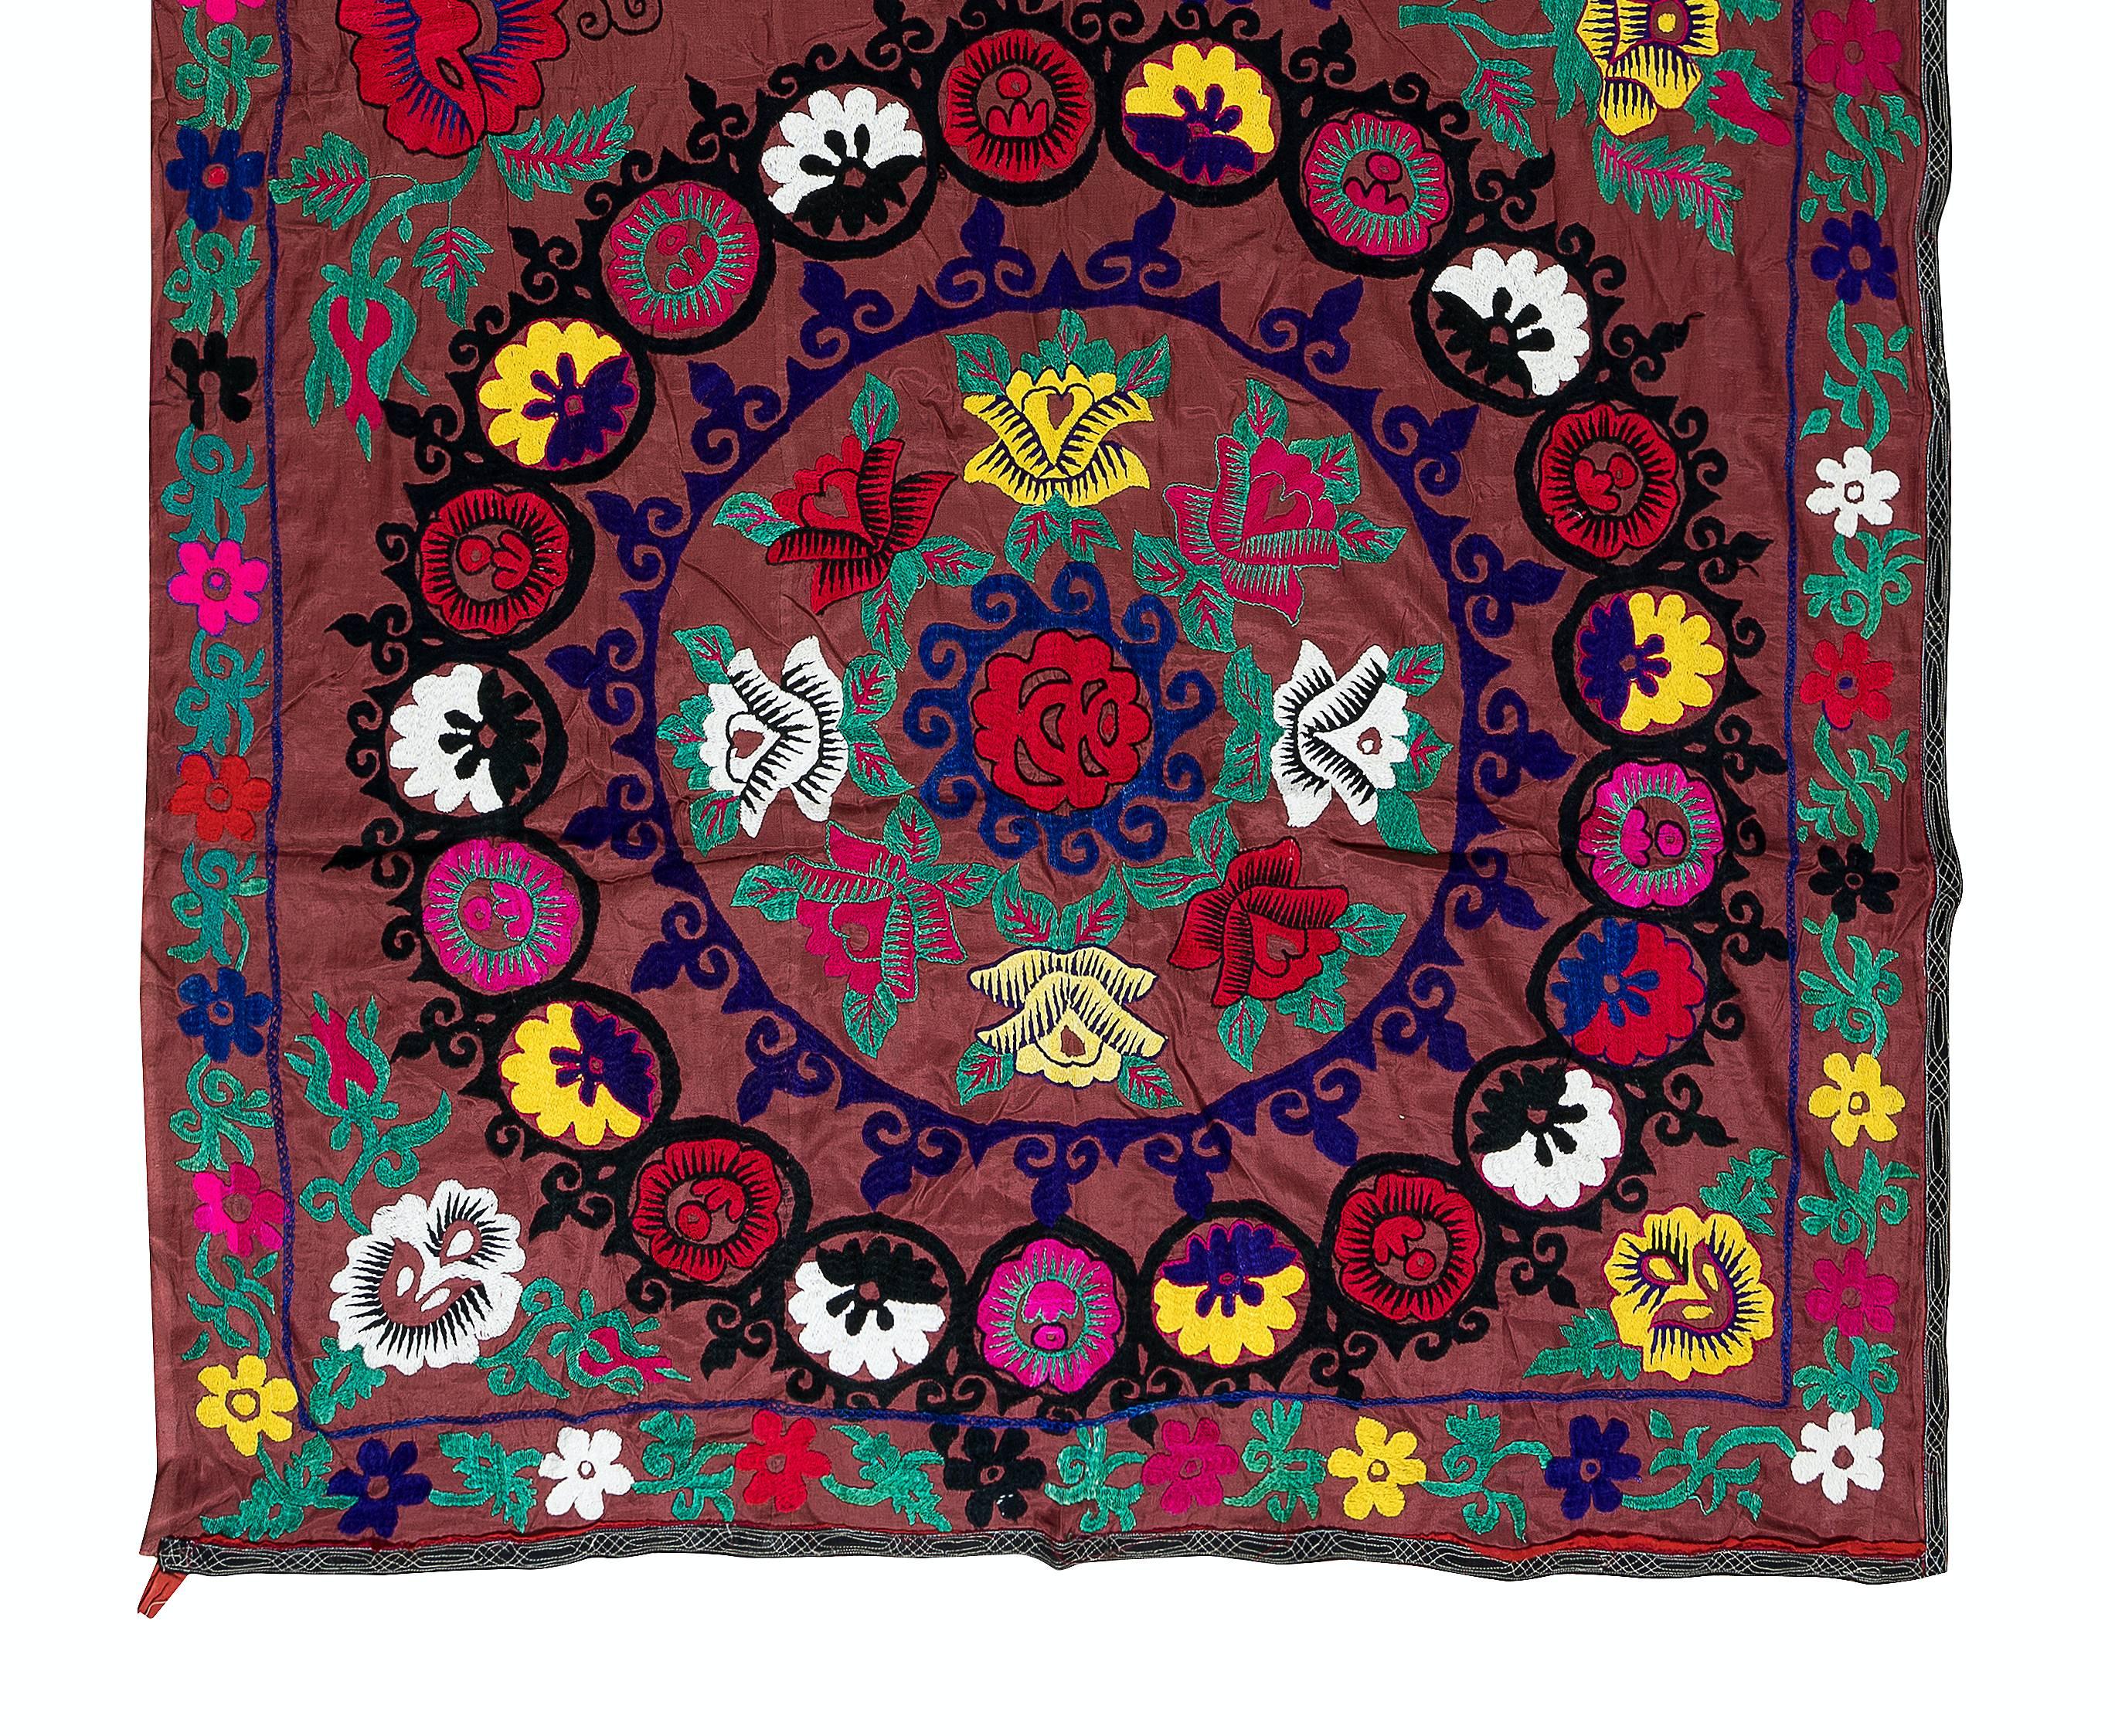 Embroidered Decorative Silk Embroidery Bed Cover, Uzbek 1970s Suzani Wall Hanging For Sale